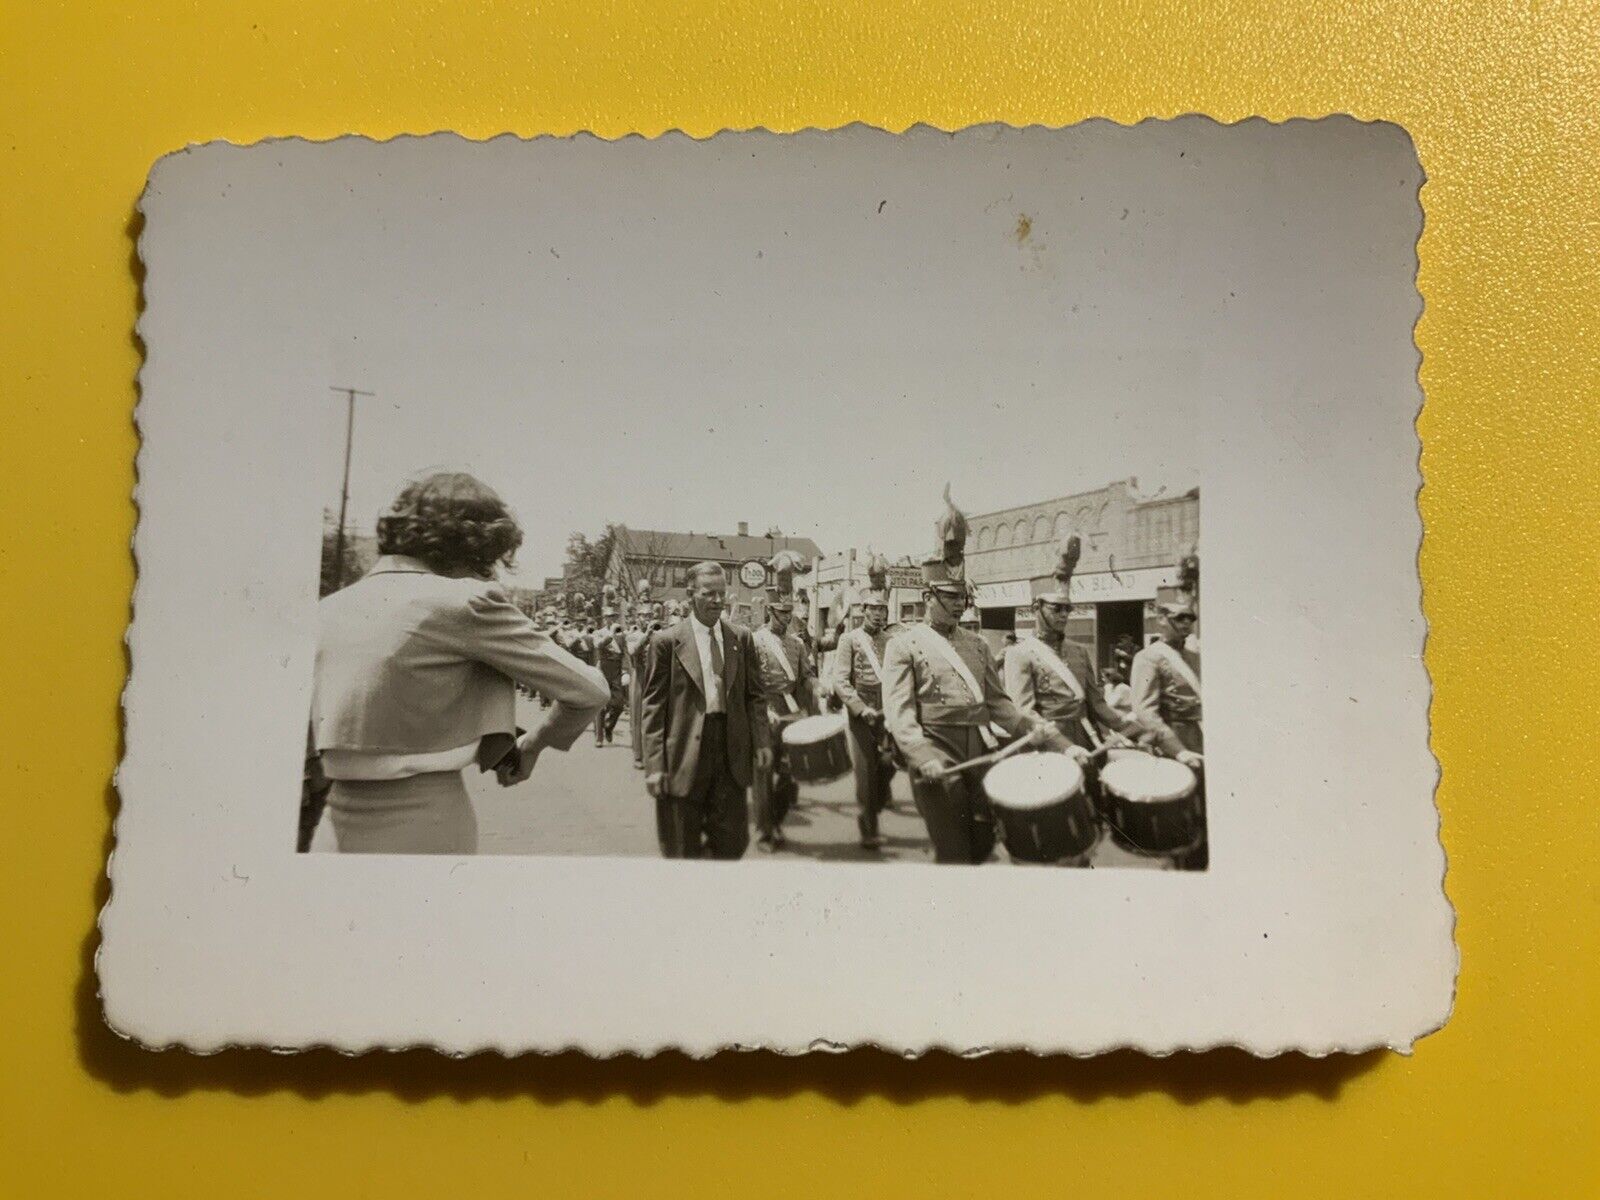 Marching Band Drummers Parade Vintage B&W Snapshot Photo